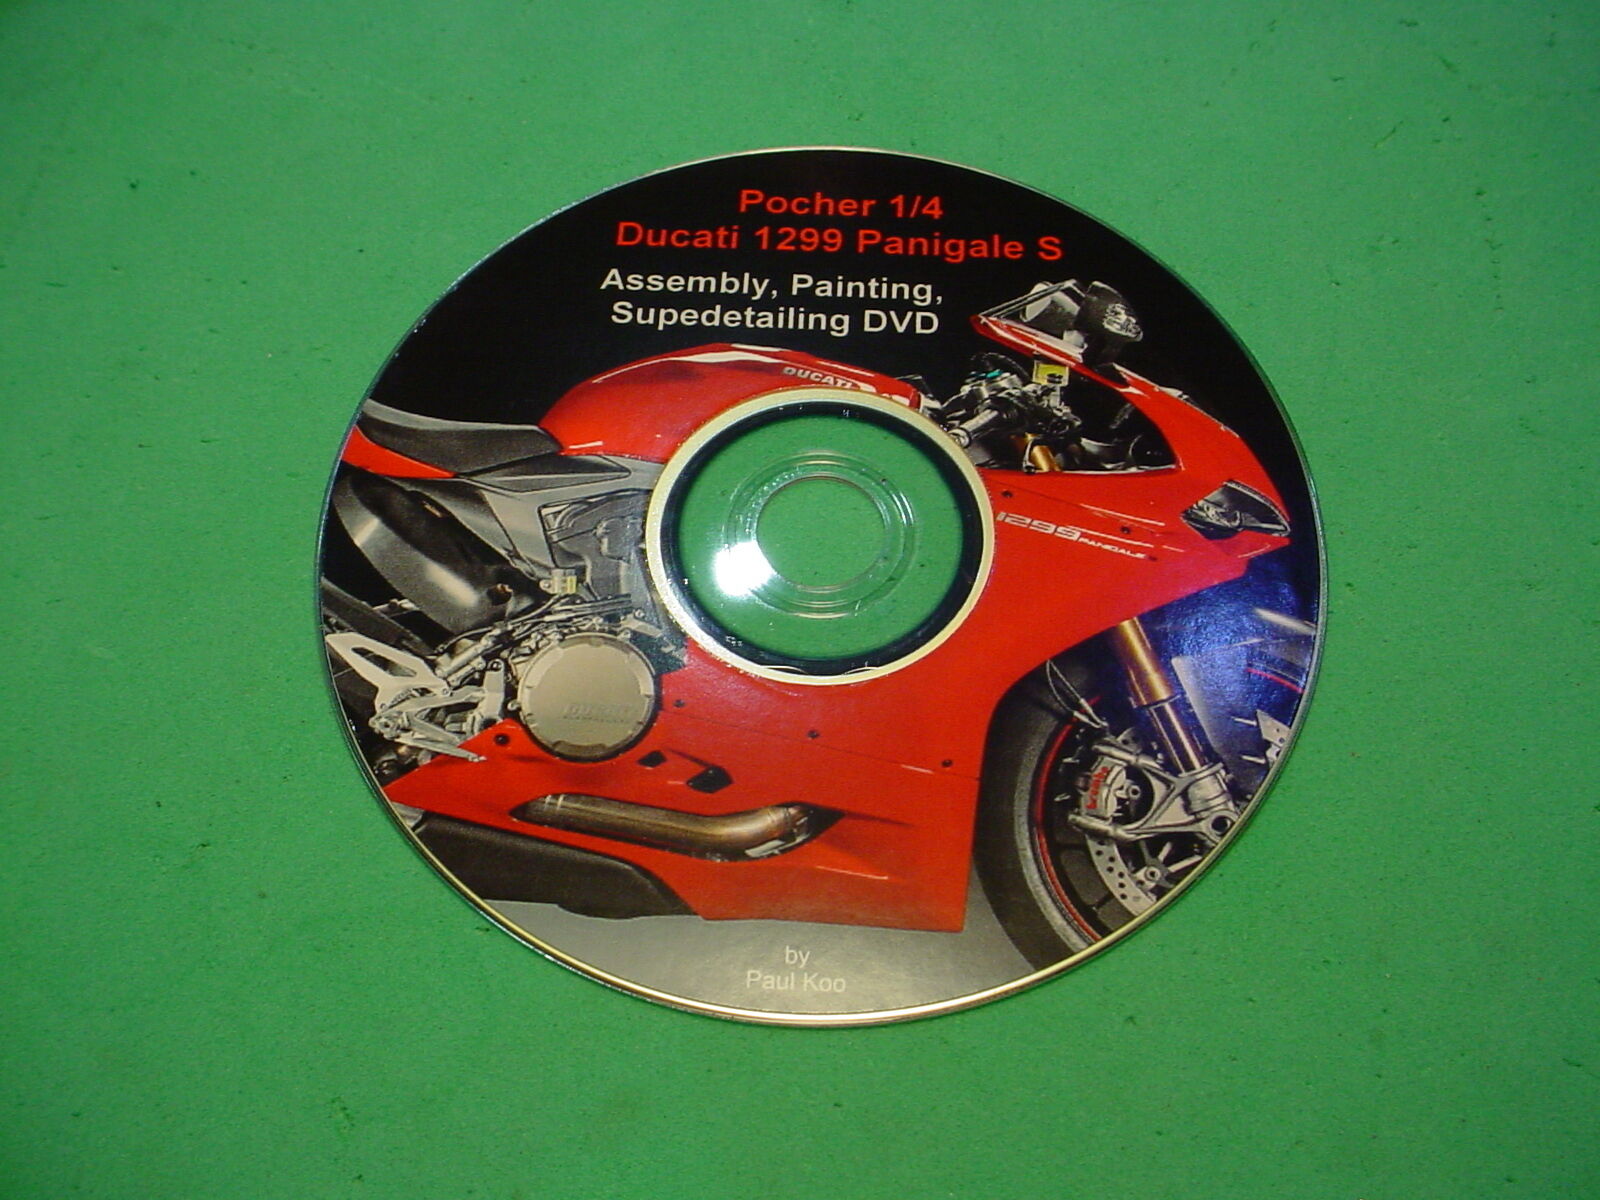 Pocher 1/4 Ducati 1299 Panigale S Assembly, Painting & Superdetailing Dvd